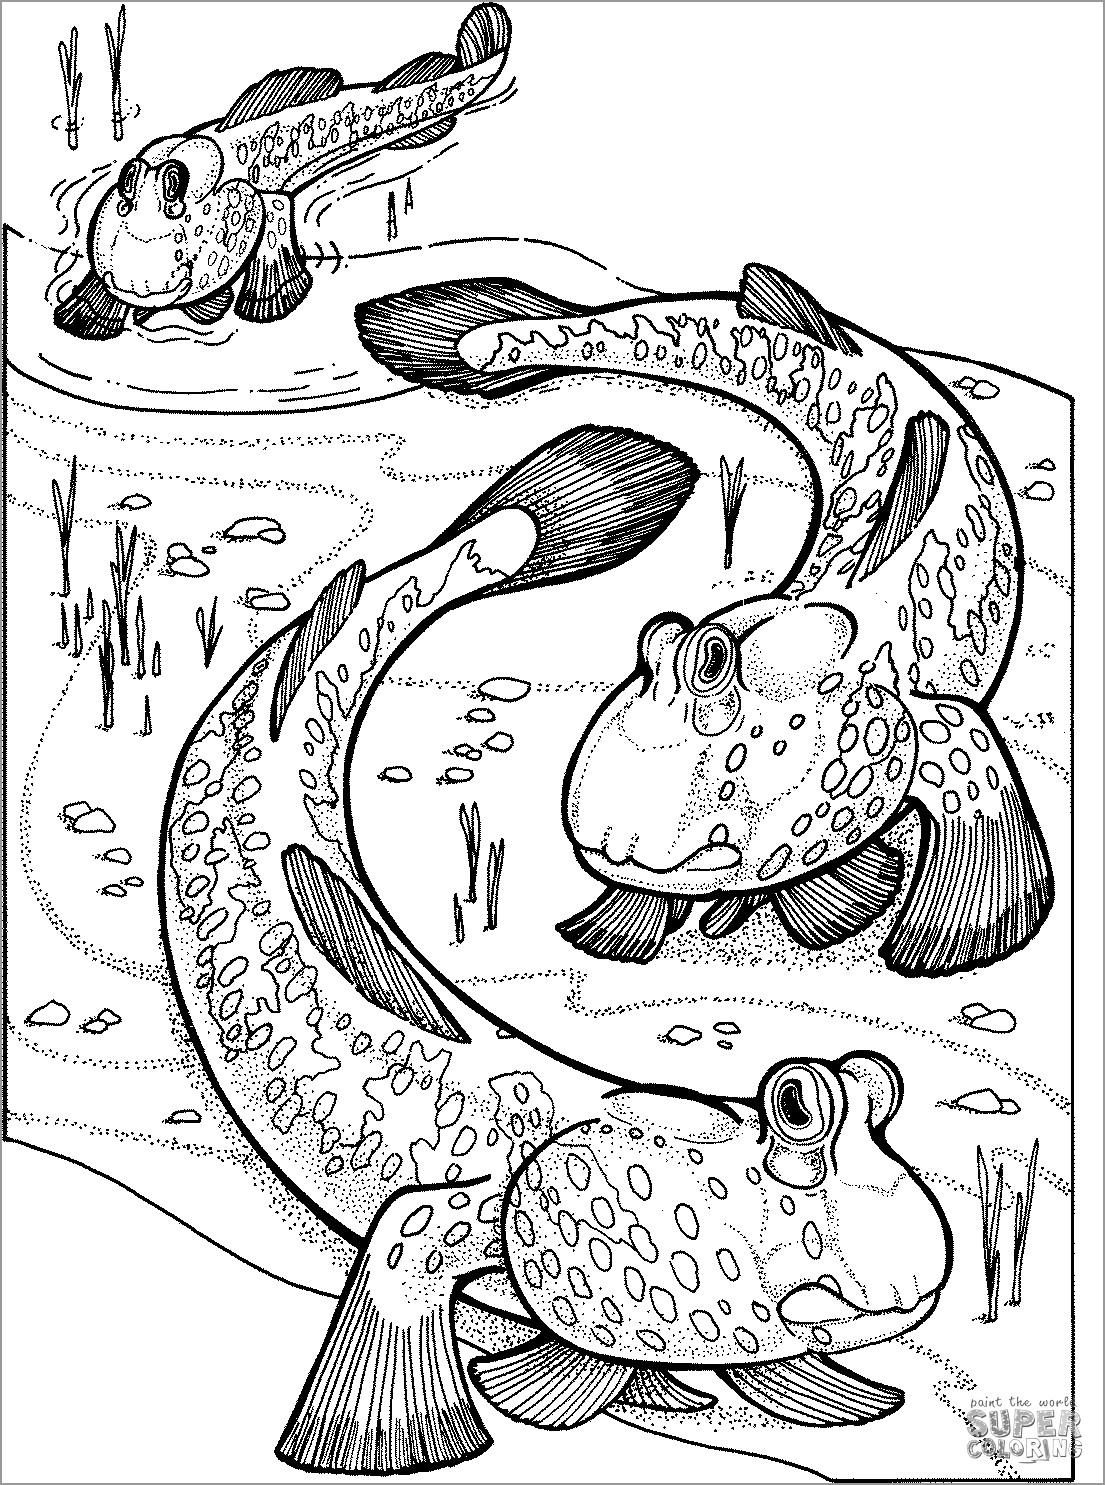 Mudskipper Coloring Page to Print